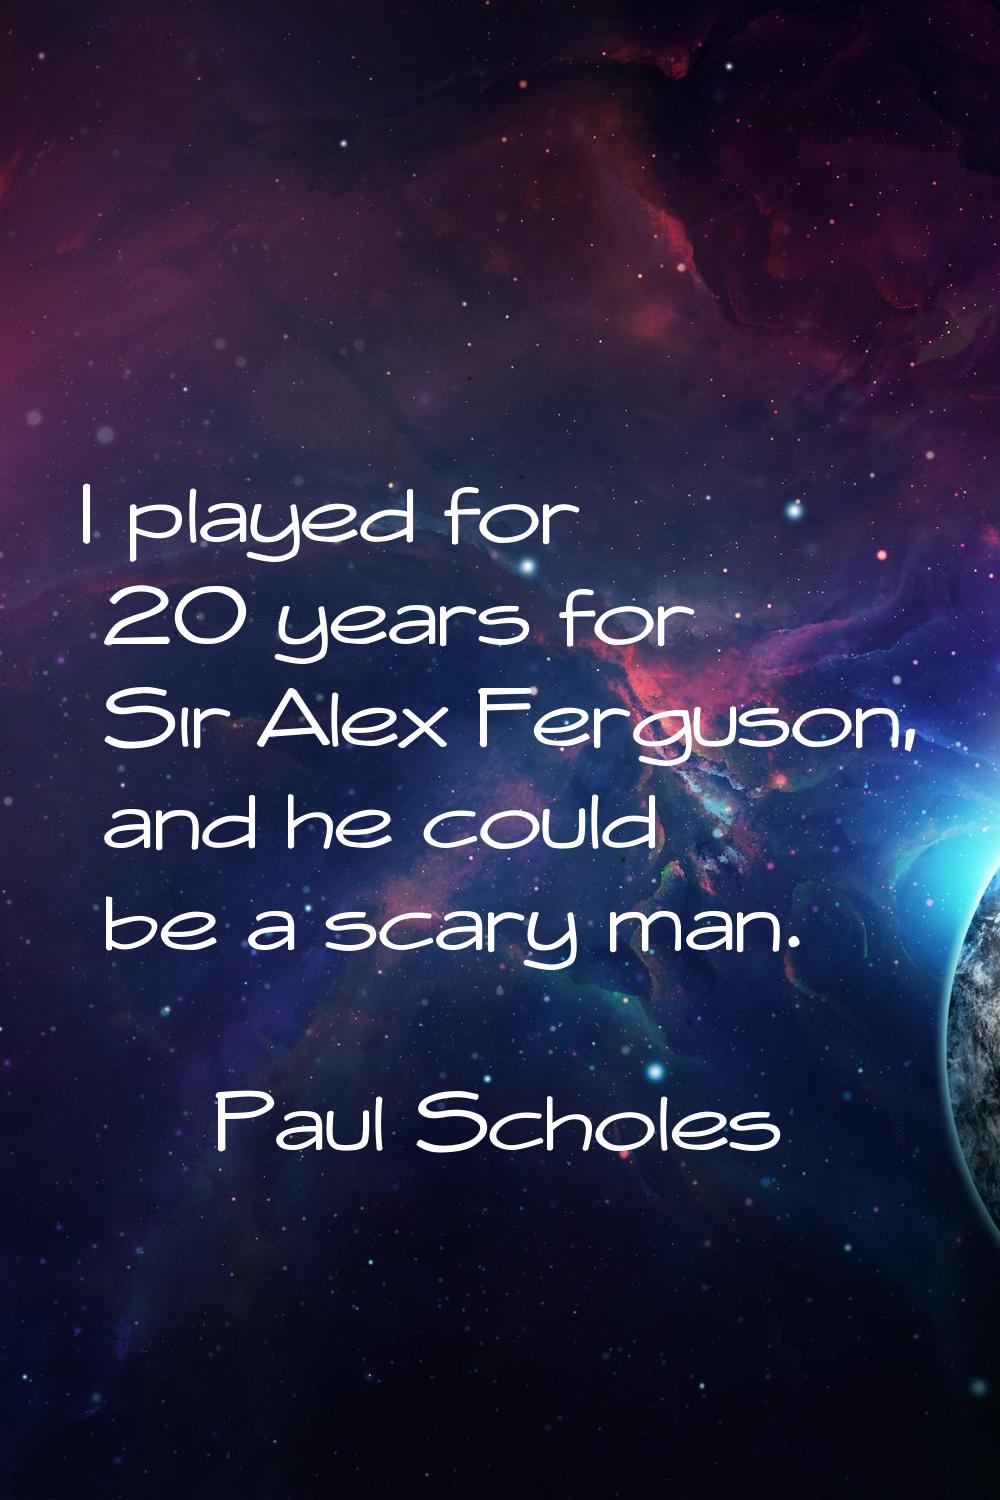 I played for 20 years for Sir Alex Ferguson, and he could be a scary man.